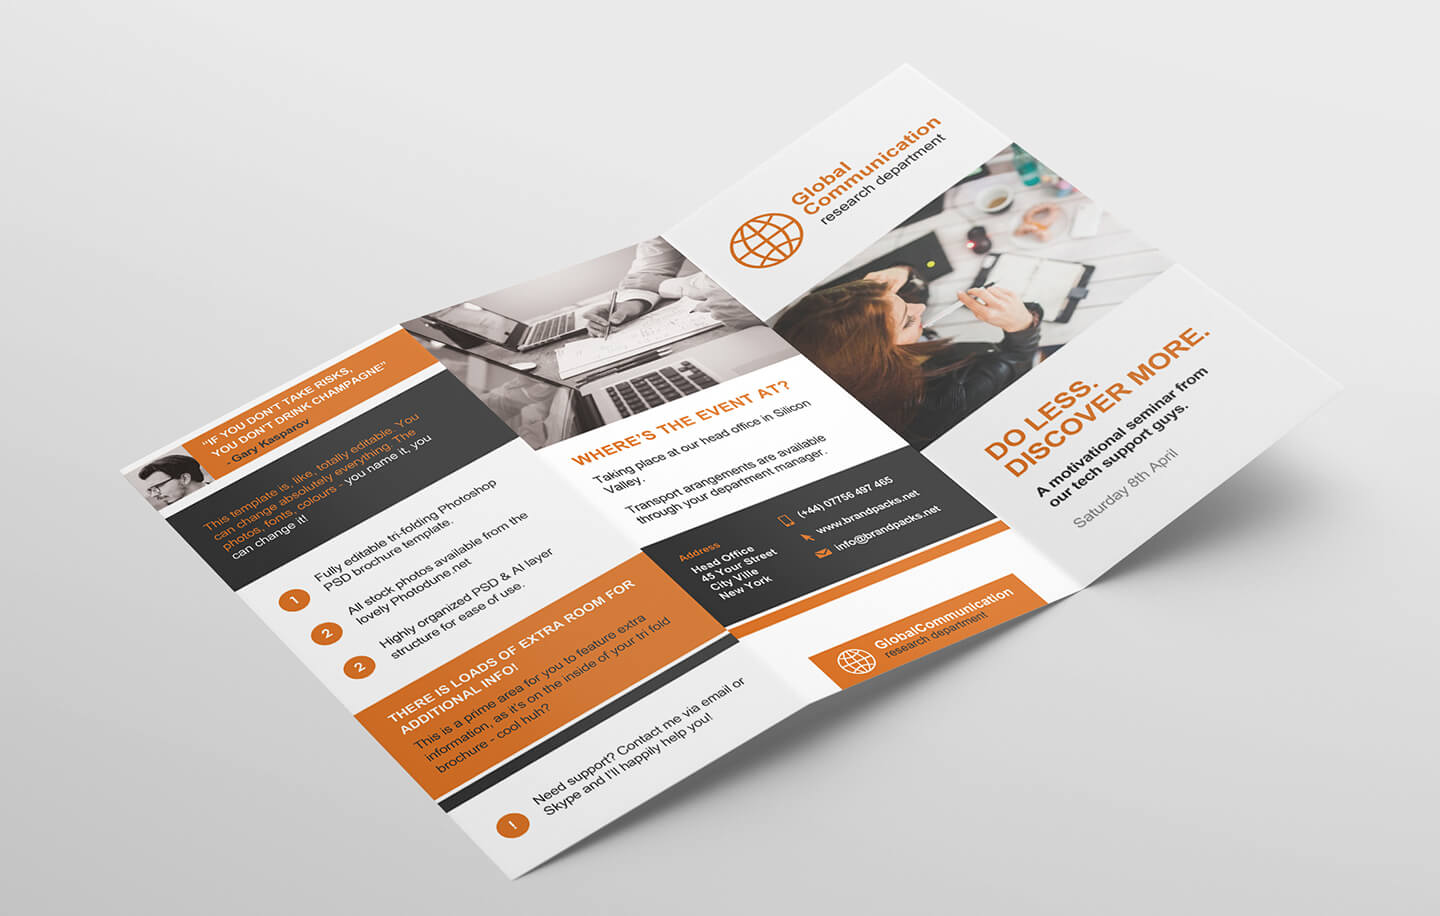 Free 3 Fold Brochure Template For Photoshop & Illustrator Throughout 3 Fold Brochure Template Psd Free Download